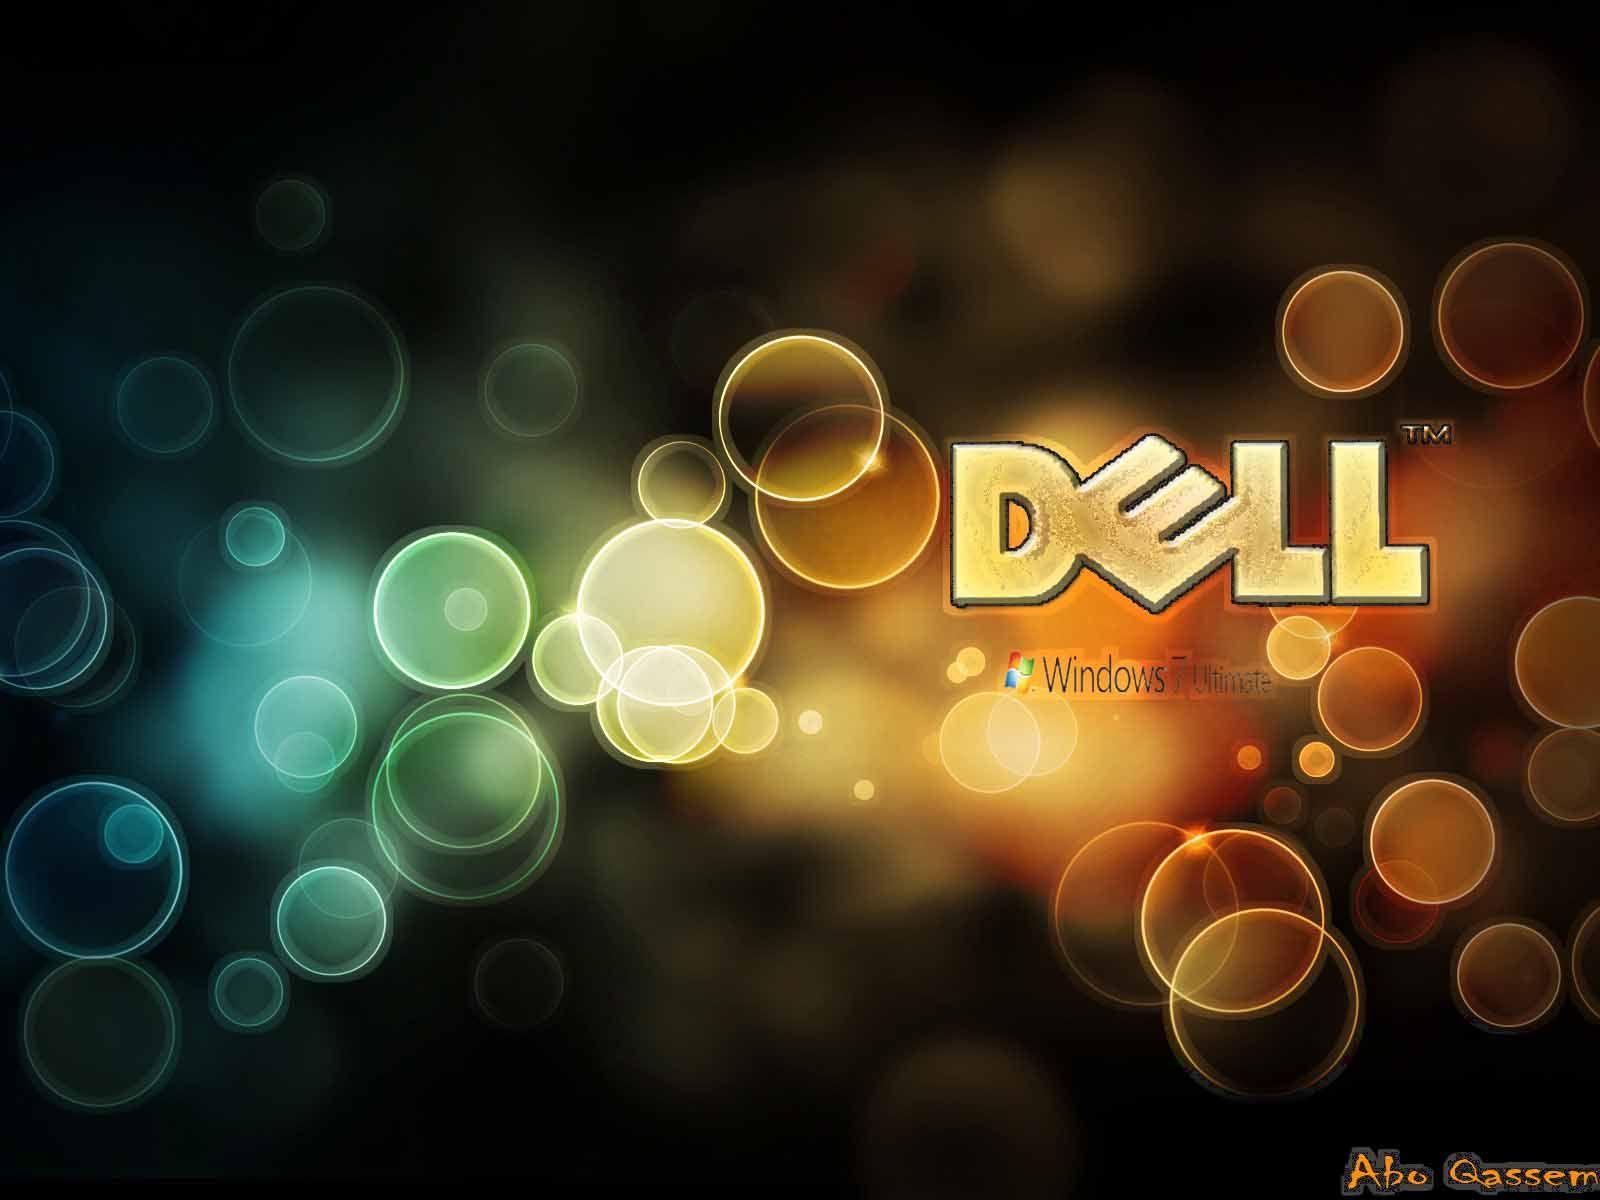 Dell Pc Wallpapers Top Free Dell Pc Backgrounds Wallpaperaccess